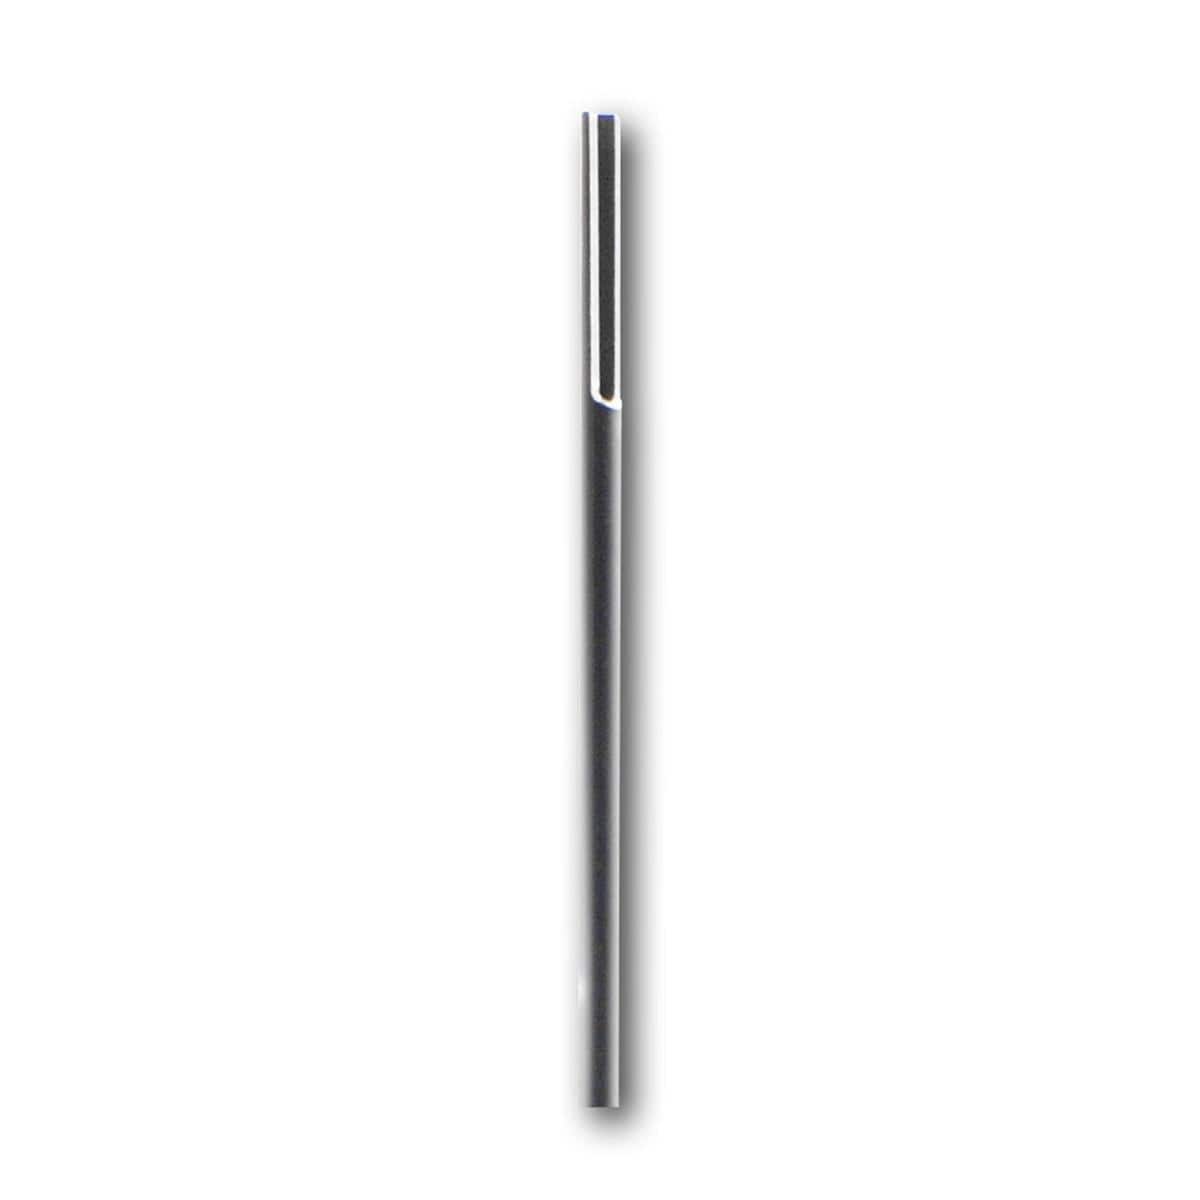 CanalPro™ Slotted-End Tips - Hellgrau - 30G, 0,3 mm, Packung 100 Stück